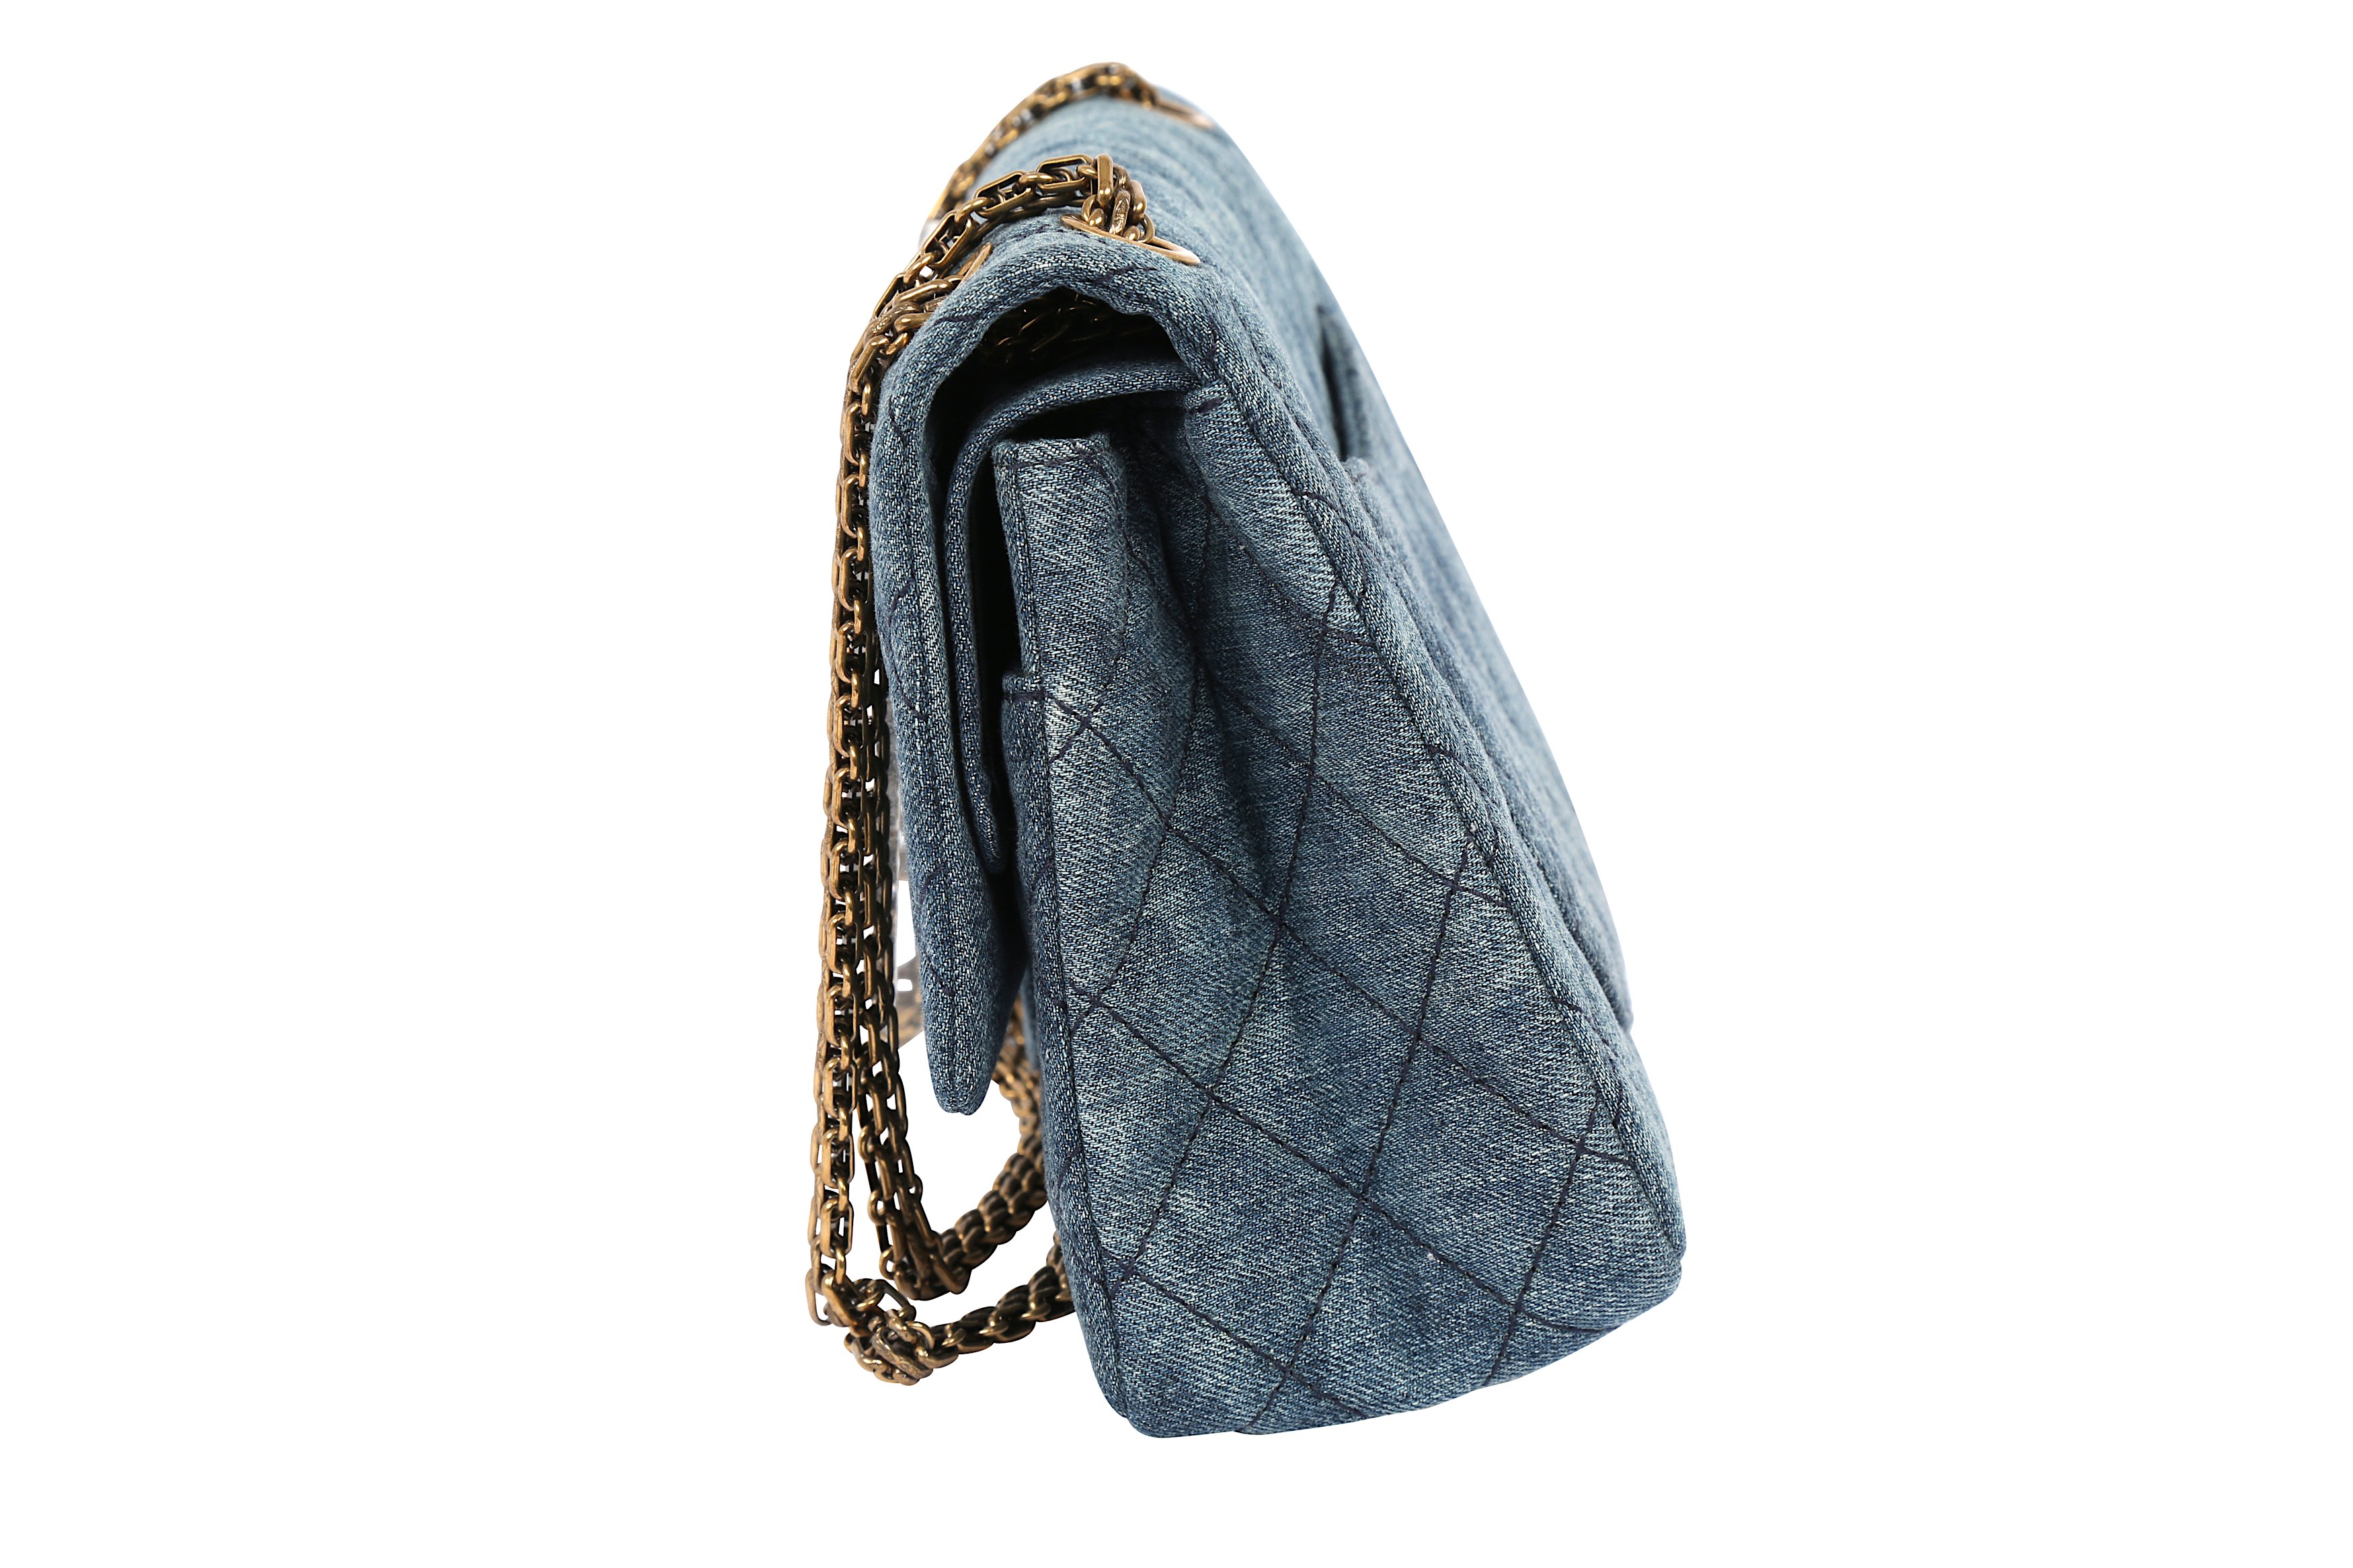 CHANEL, Bags, Chanel Classic Denim Reissue 226 Quilted Double Flap Bag